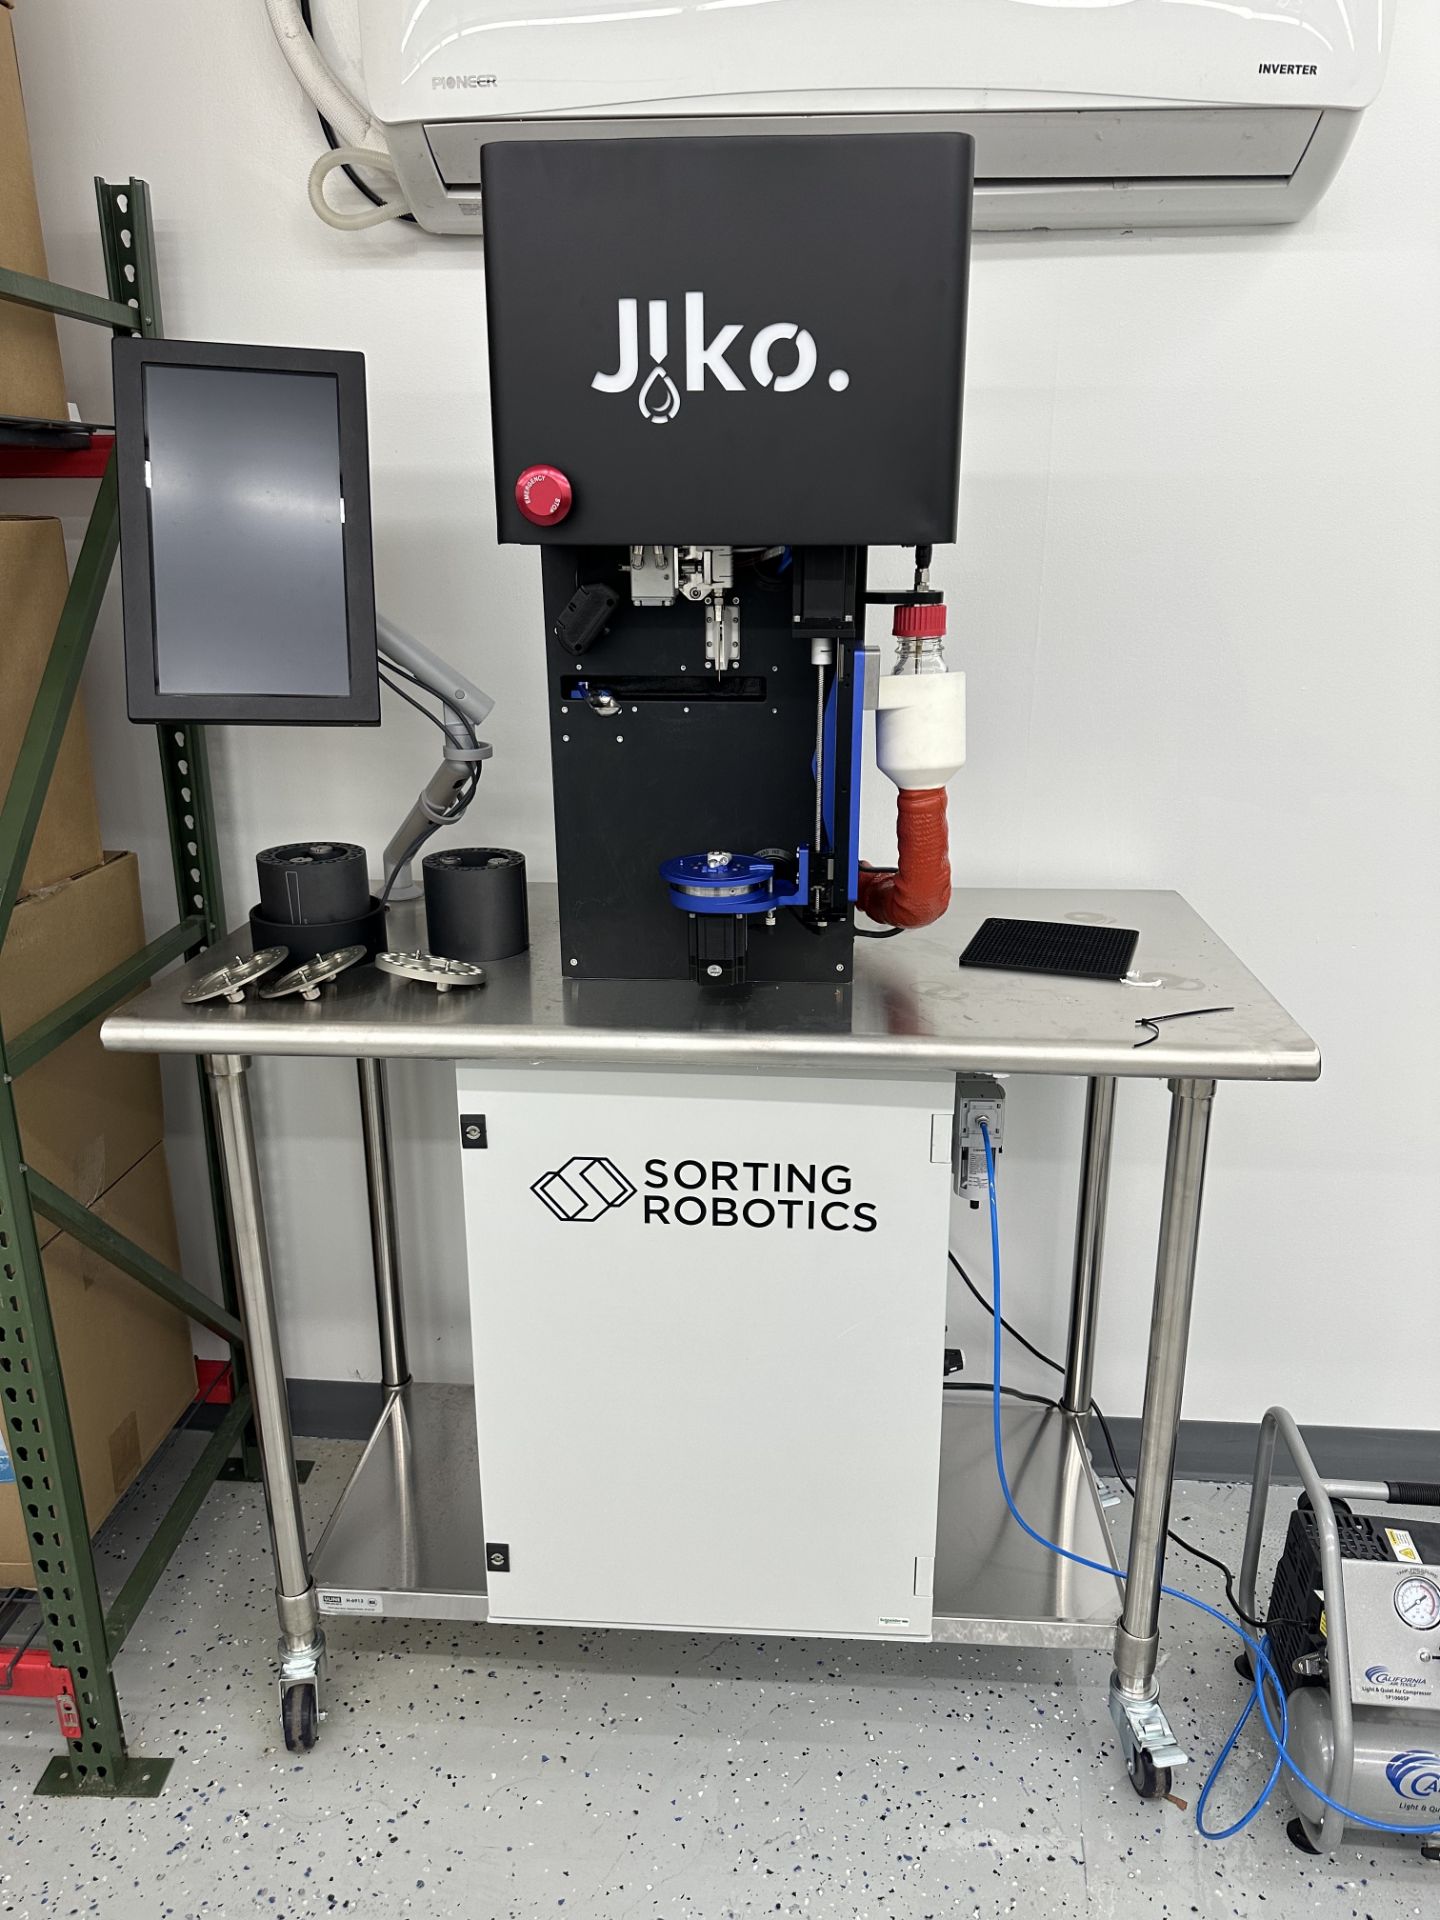 Used Sorting Robotics Jiko Automated Pre-Roll Infusion Robot. Model Jiko. Auto Infuses pre-rolls